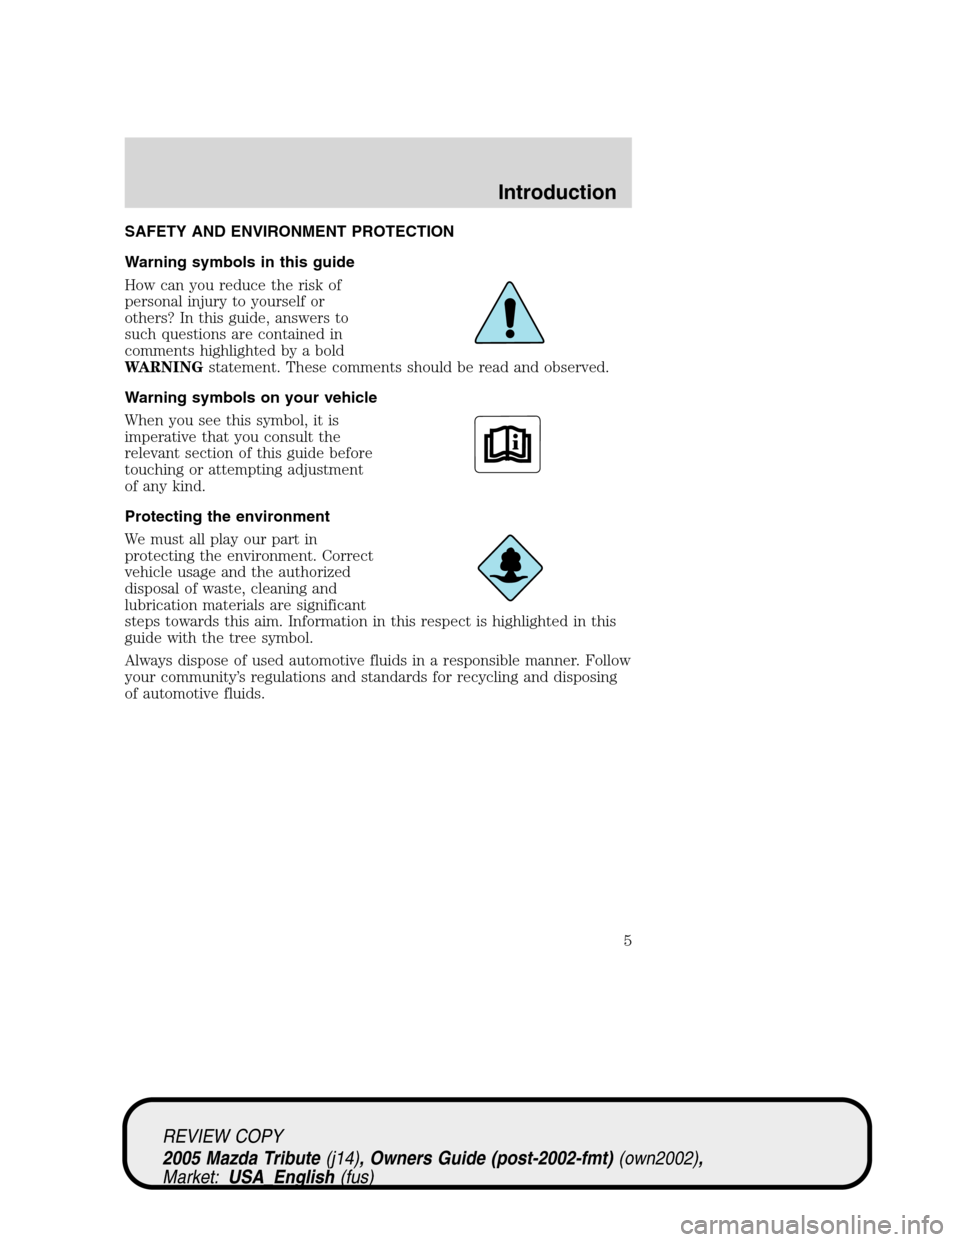 MAZDA MODEL TRIBUTE 2005  Owners Manual (in English) SAFETY AND ENVIRONMENT PROTECTION
Warning symbols in this guide
How can you reduce the risk of
personal injury to yourself or
others? In this guide, answers to
such questions are contained in
comments